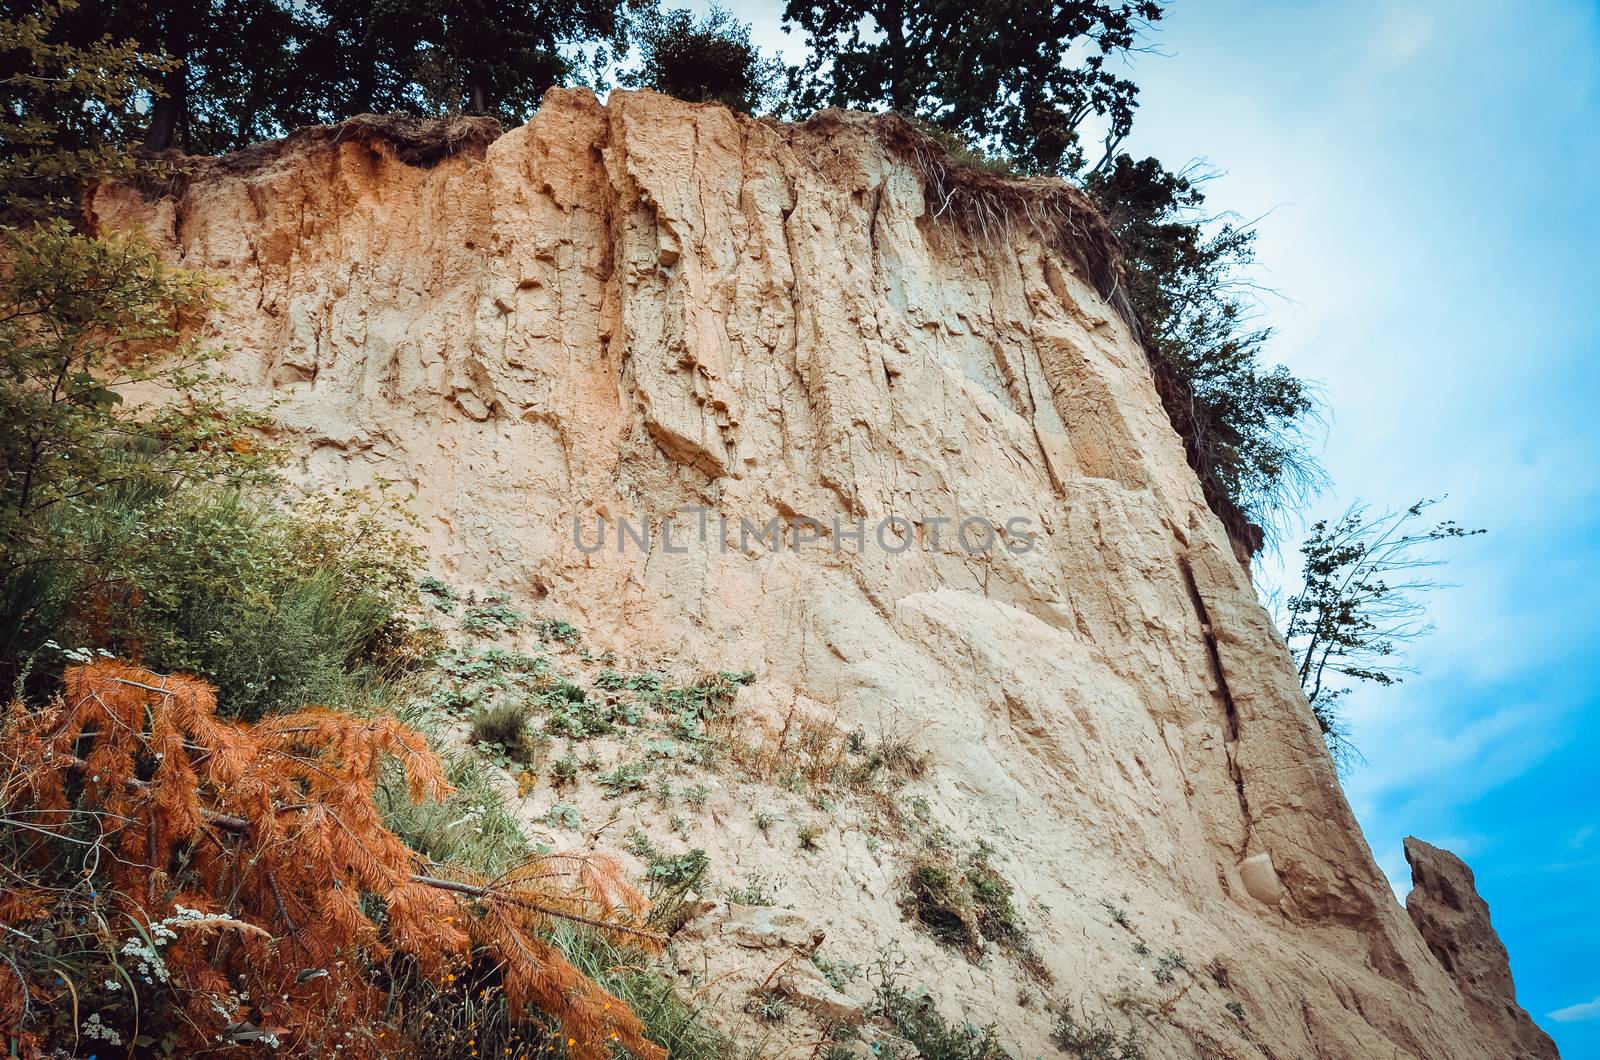 Clear strata within the cliff under blue sky